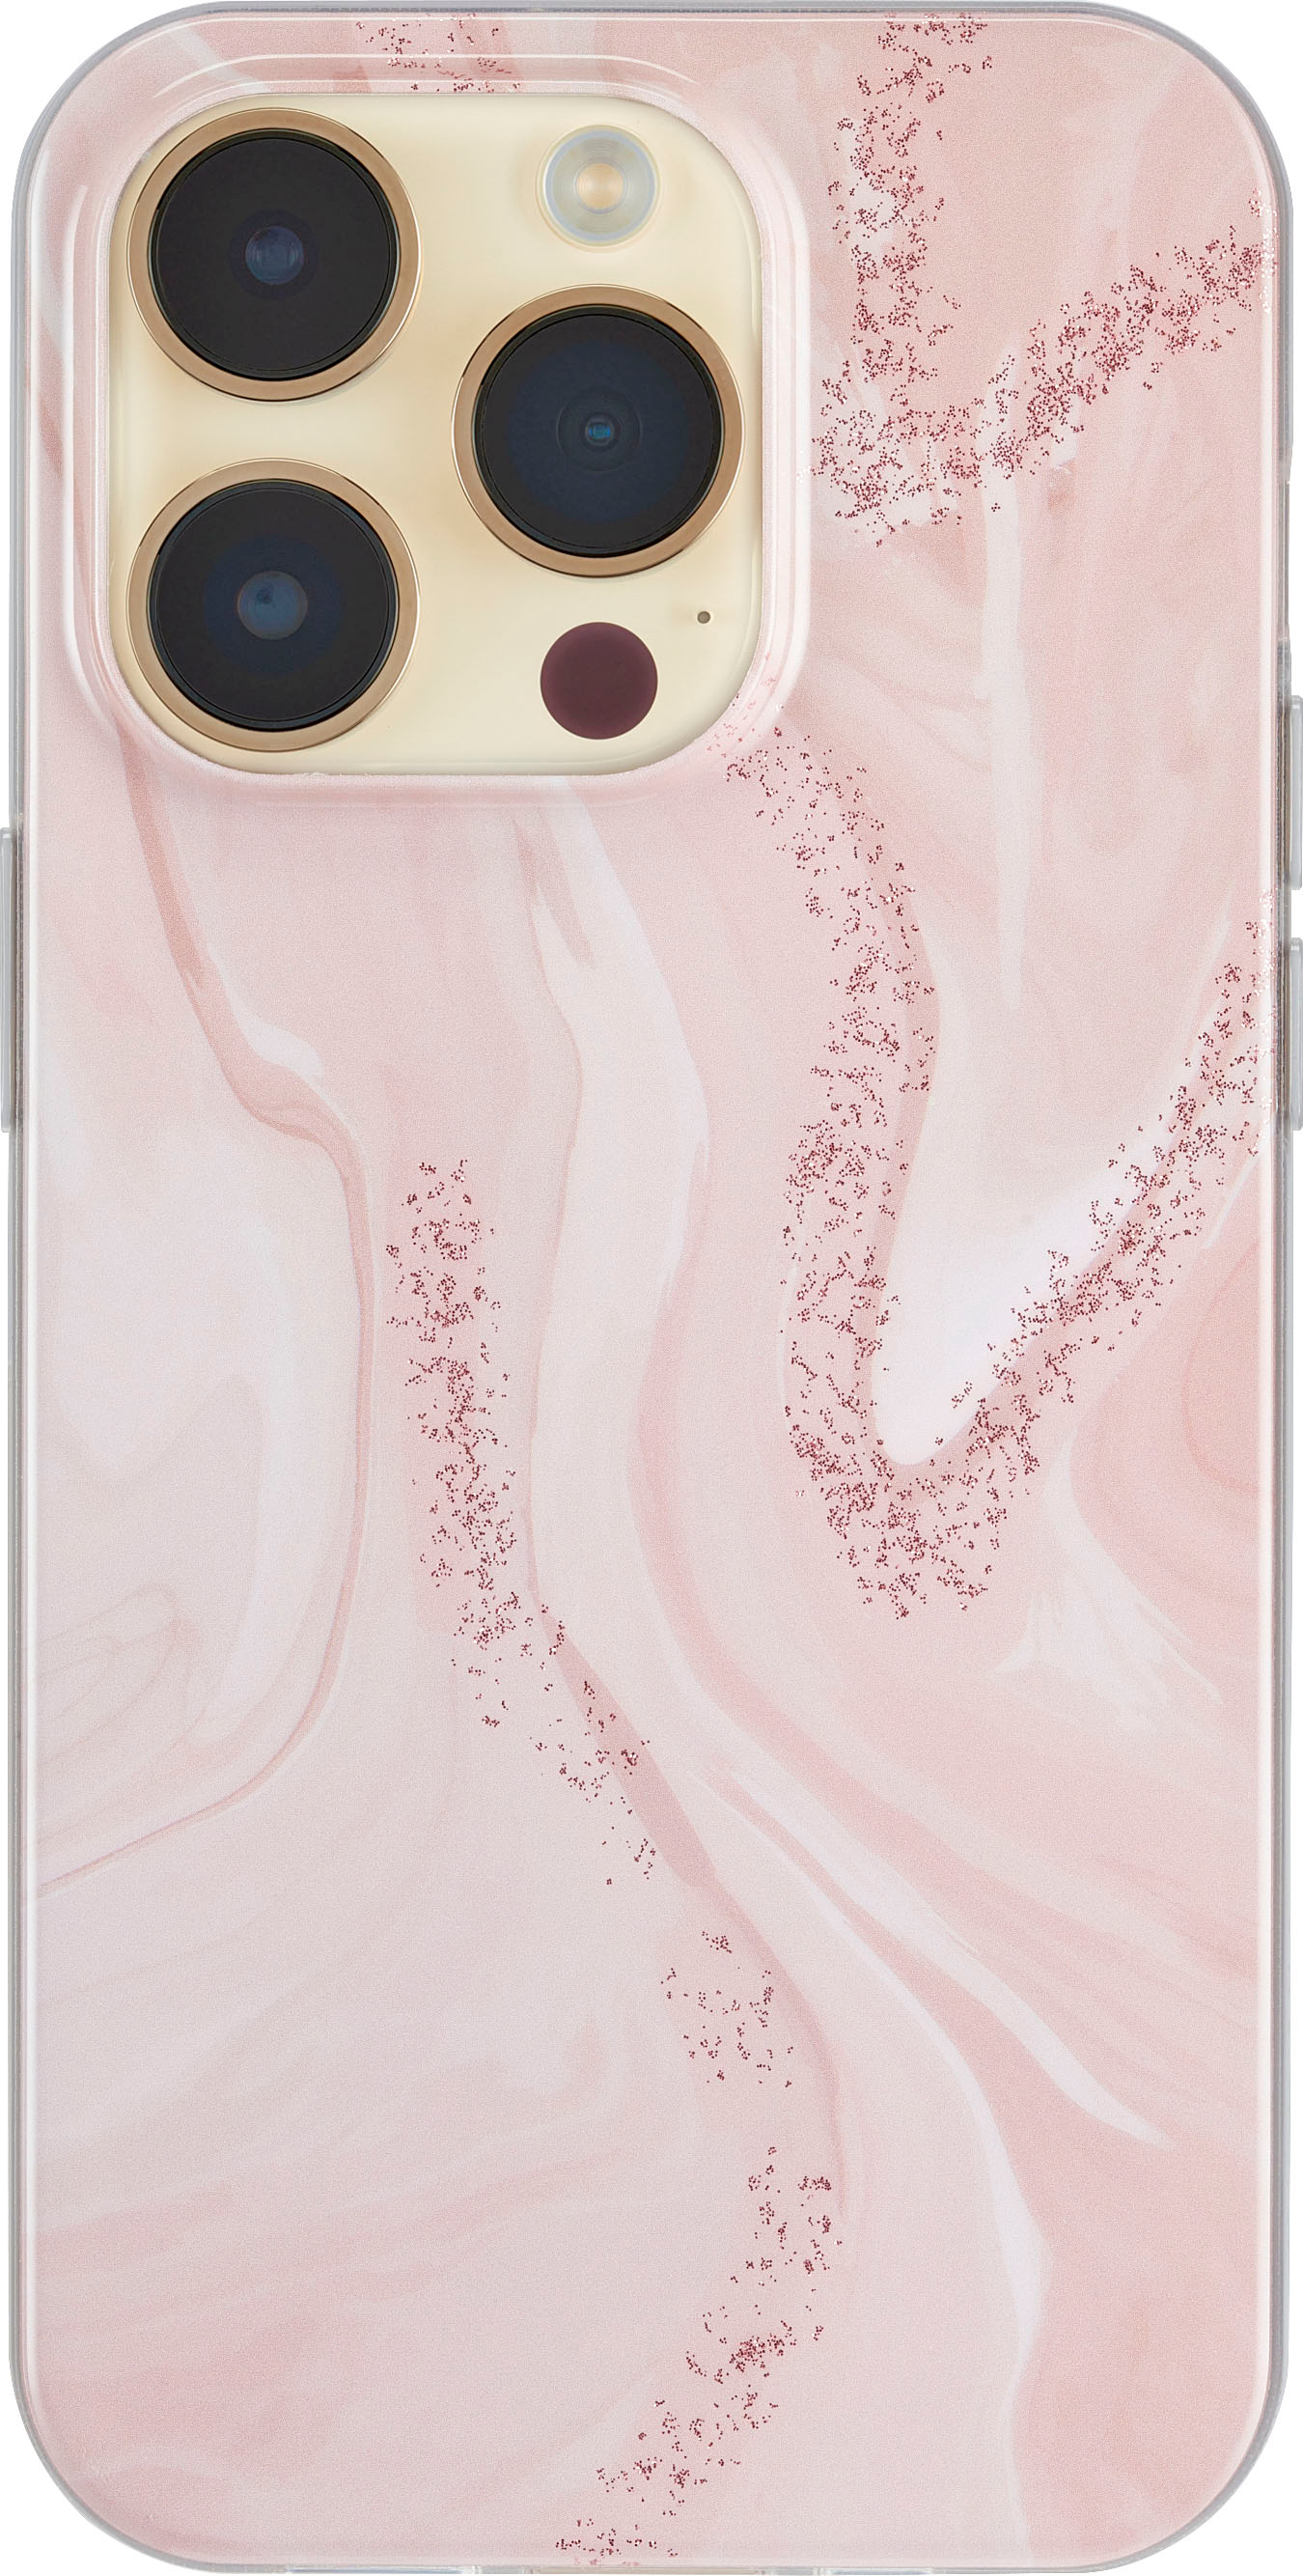 Insignia™ Hard-Shell Case for iPhone 14 Pro Pink Marble NS-14PTPMRBL - Best  Buy